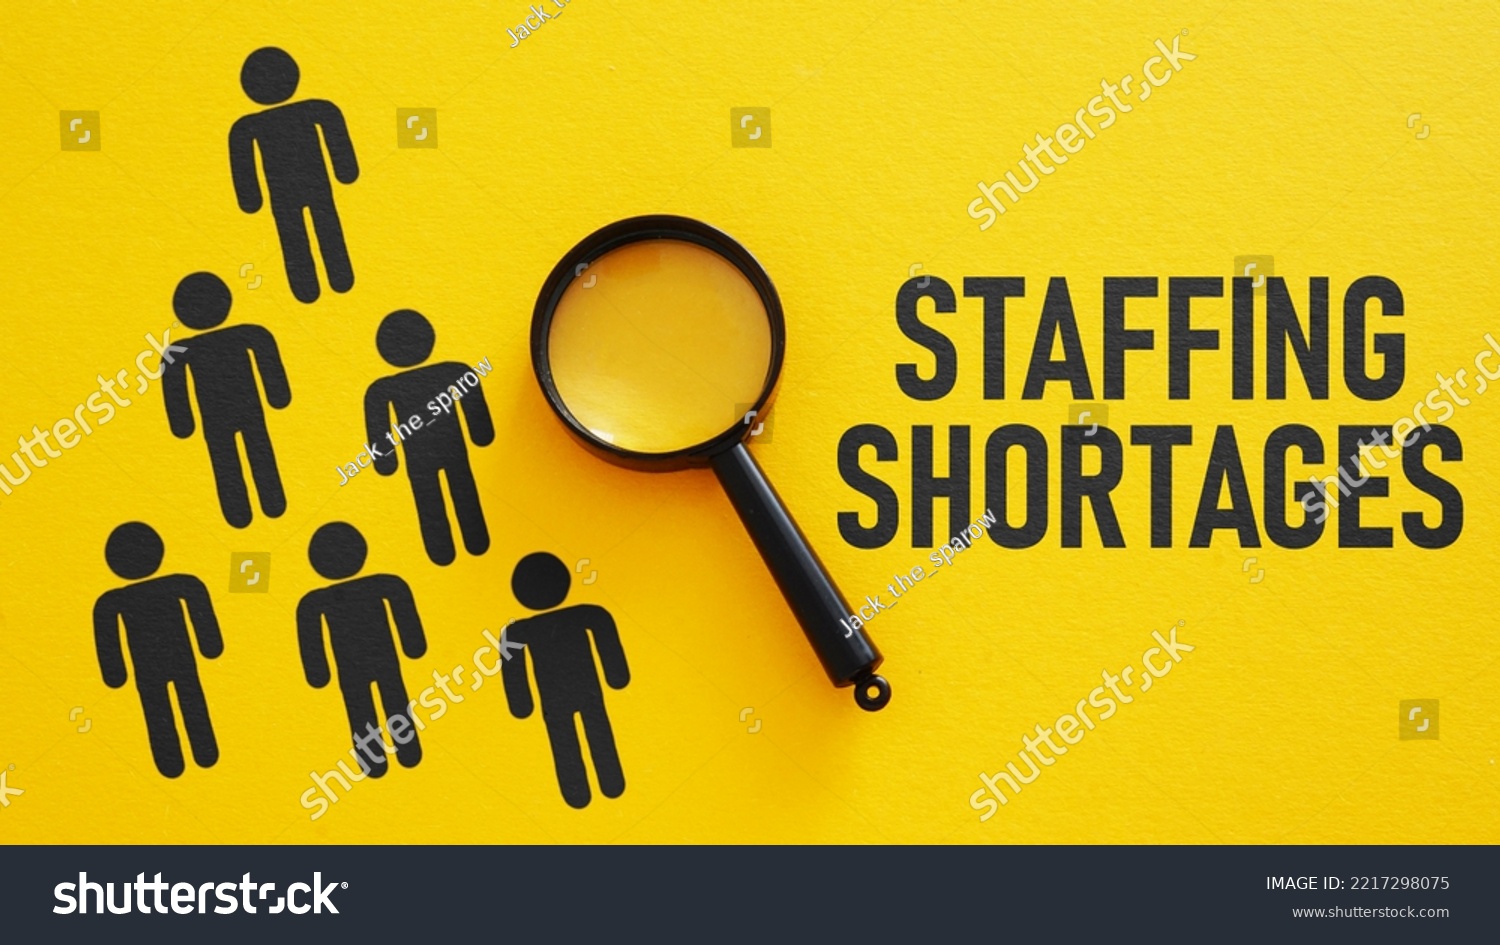 Staffing shortages is shown using a text #2217298075